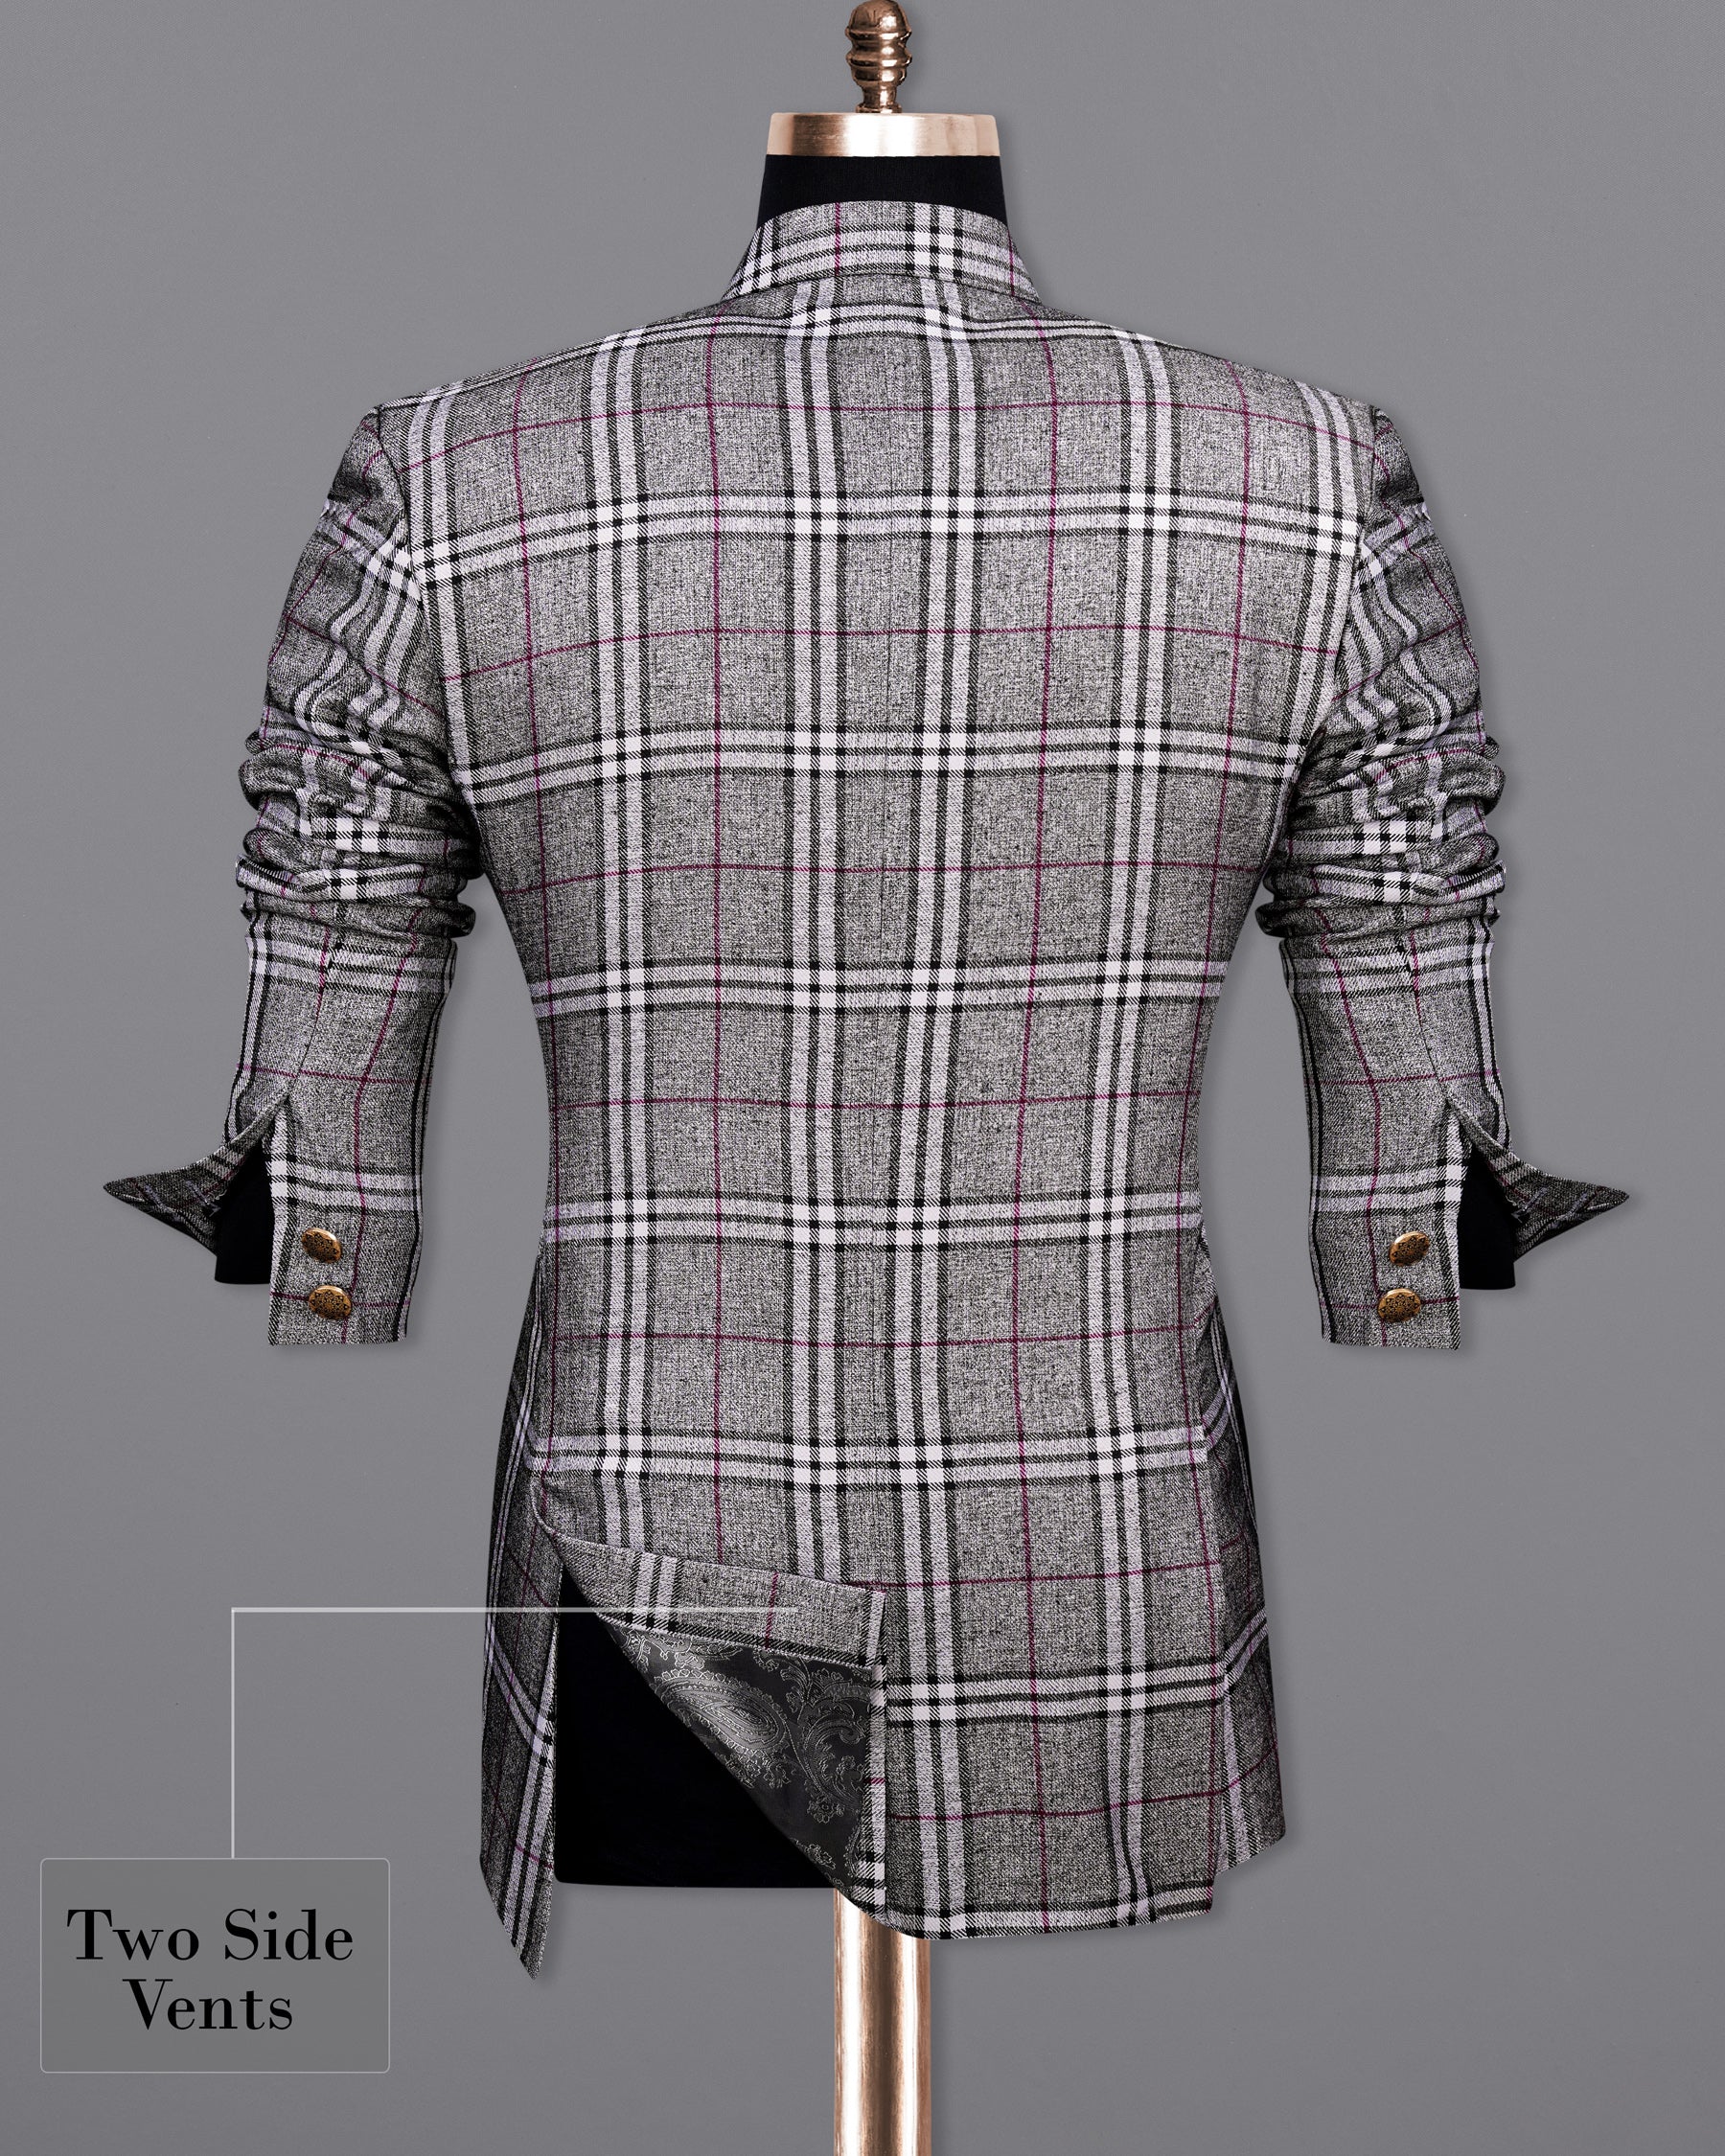 Amethyst Gray with Black Plaid Cross Buttoned Bandhgala Blazer BL2141-CBG-36, BL2141-CBG-38, BL2141-CBG-40, BL2141-CBG-42, BL2141-CBG-44, BL2141-CBG-46, BL2141-CBG-48, BL2141-CBG-50, BL2141-CBG-52, BL2141-CBG-54, BL2141-CBG-56, BL2141-CBG-58, BL2141-CBG-60